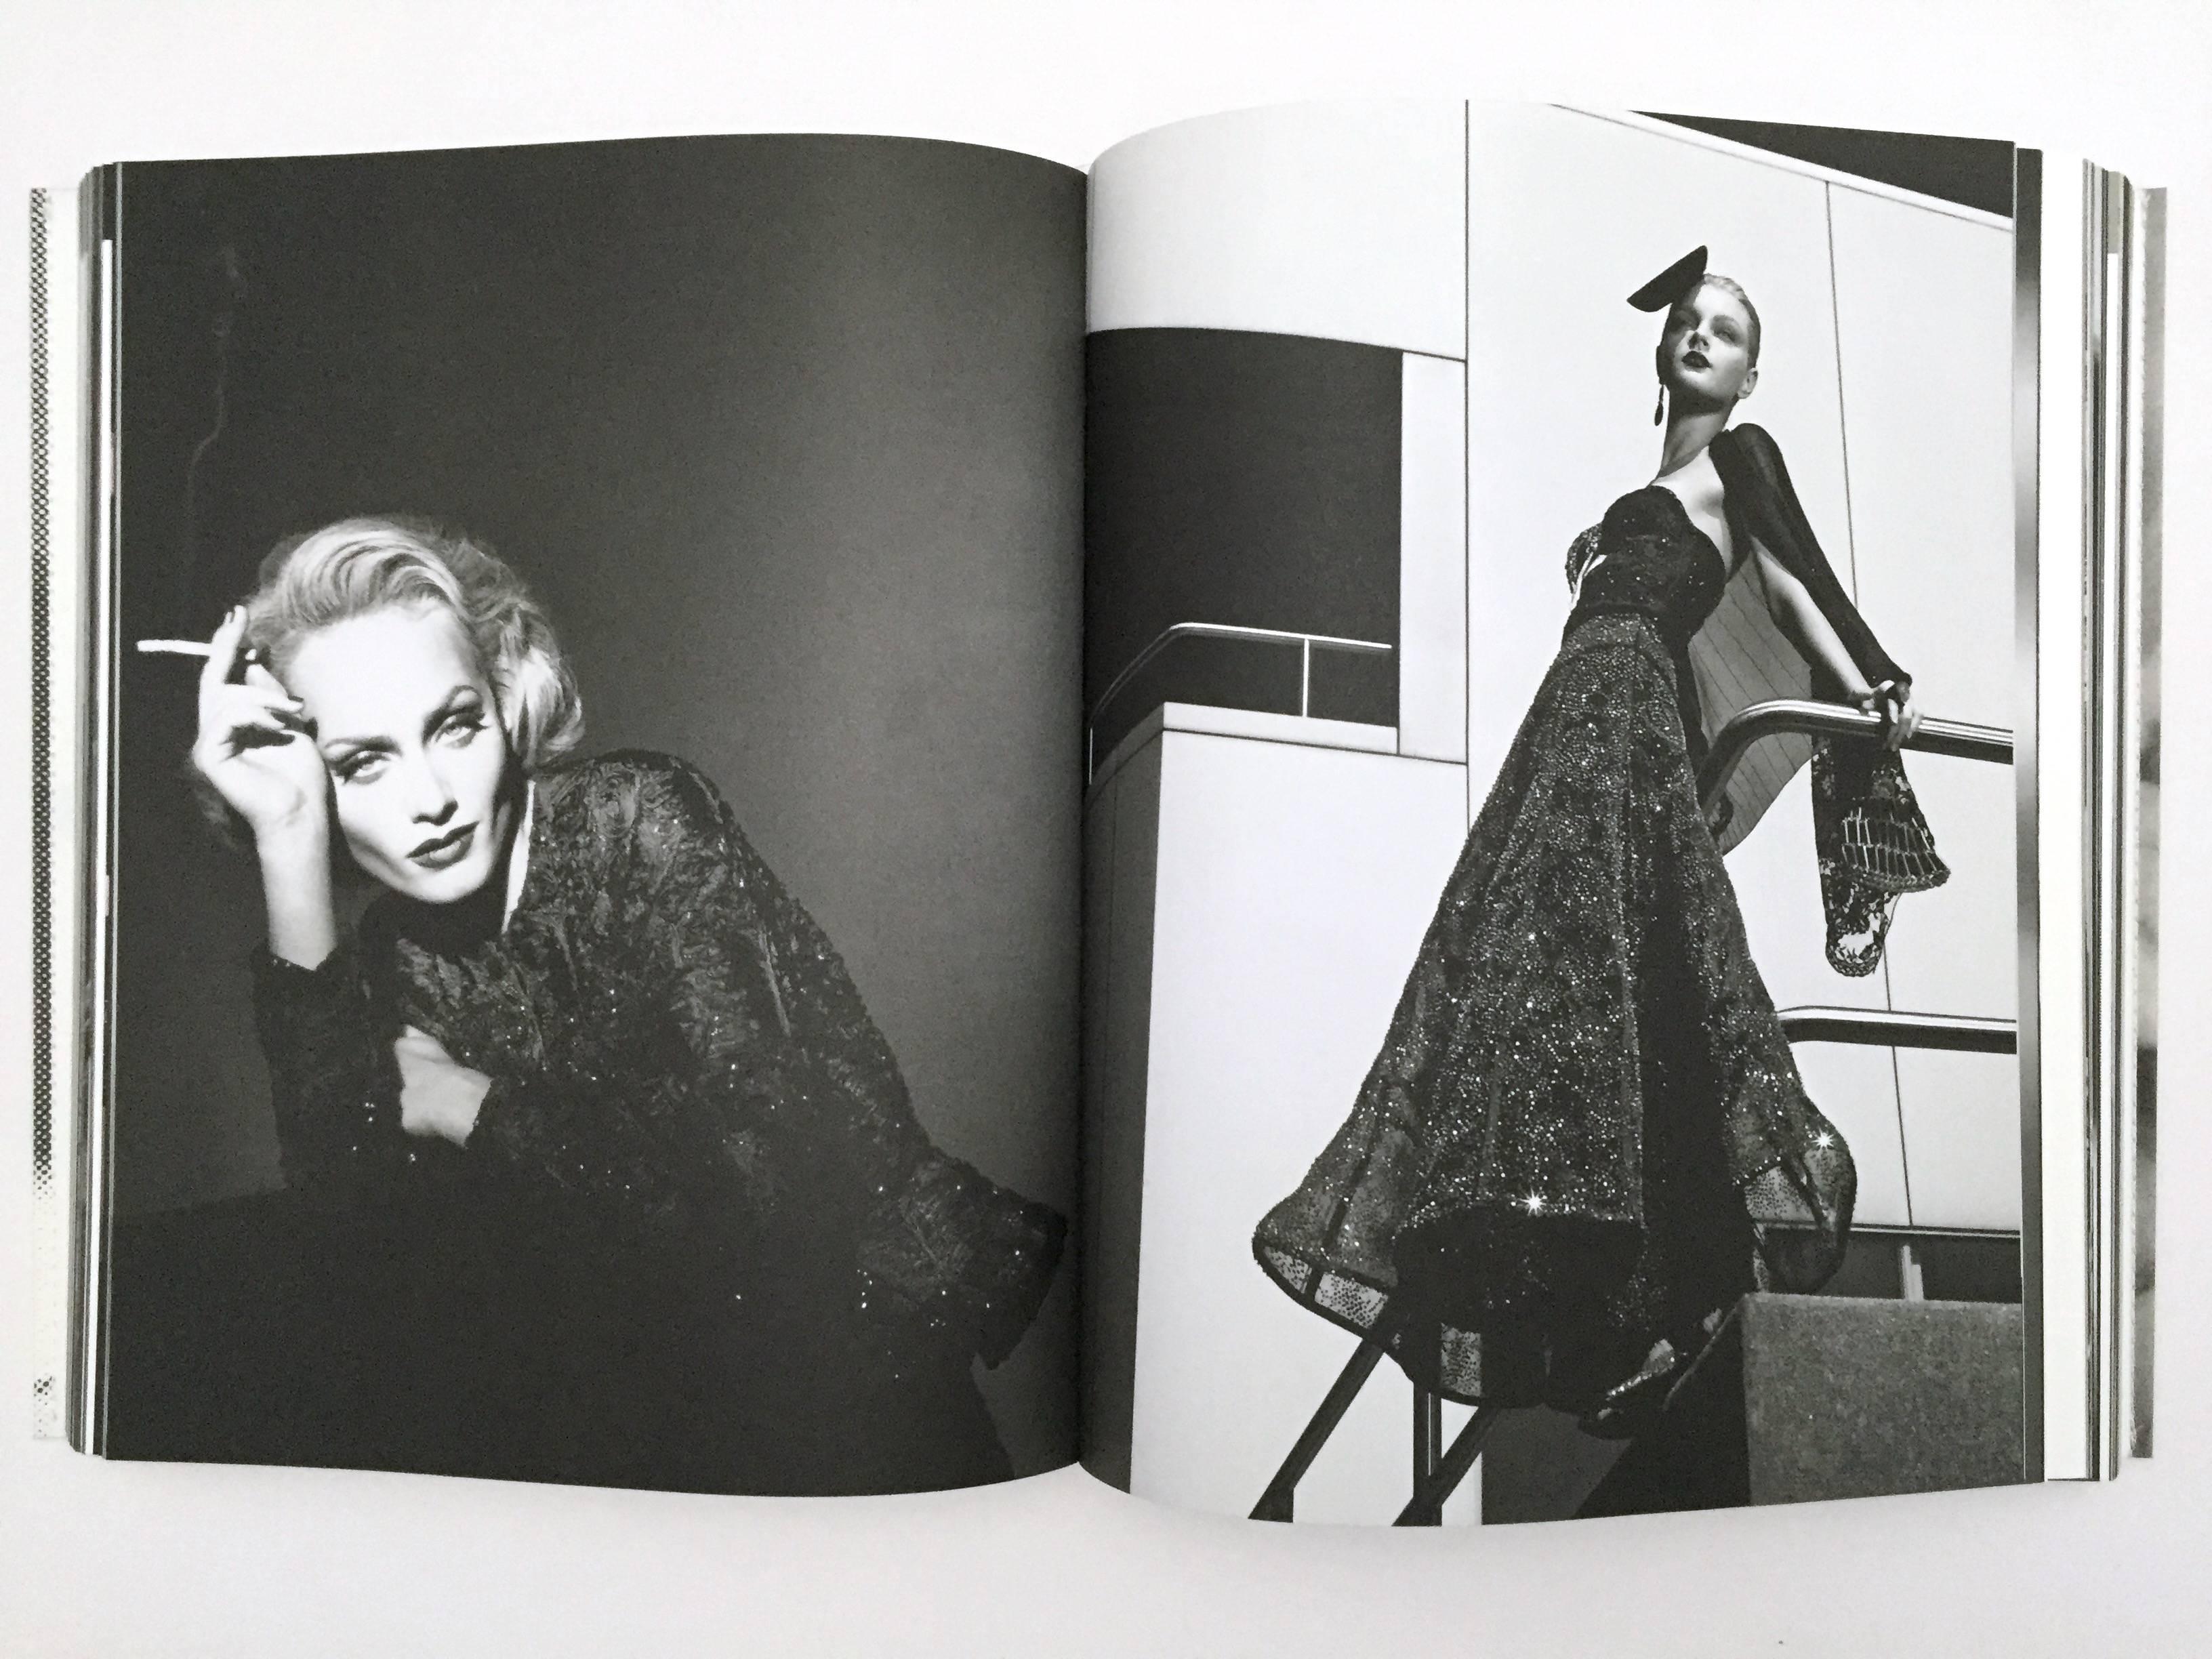 First edition, published by Rizzoli, 2015.

This large autobiographical photobook of Armani's life and work chronologically documents key moments and people along the journey. Amongst the images there are occasional pages of text from Giorgio